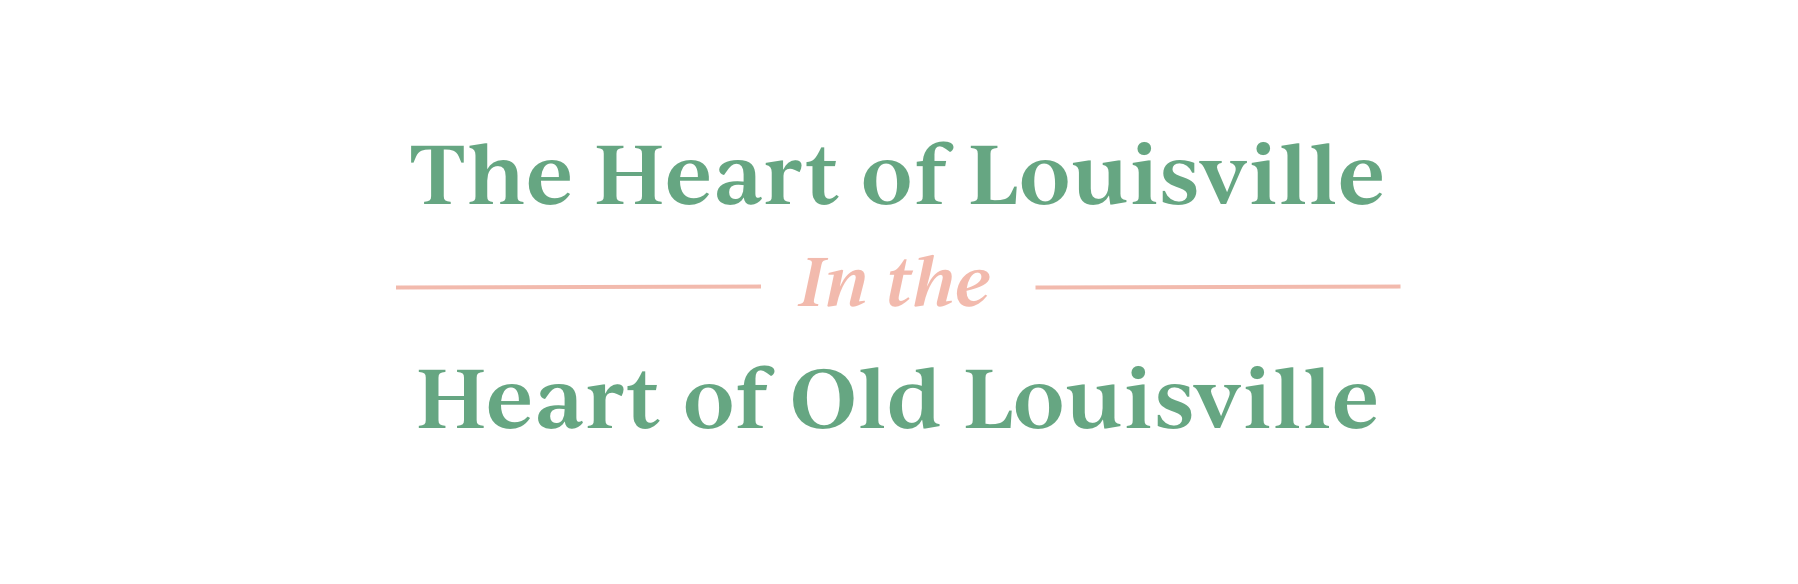 "The heart of Louisville in the heart of old Louisville."